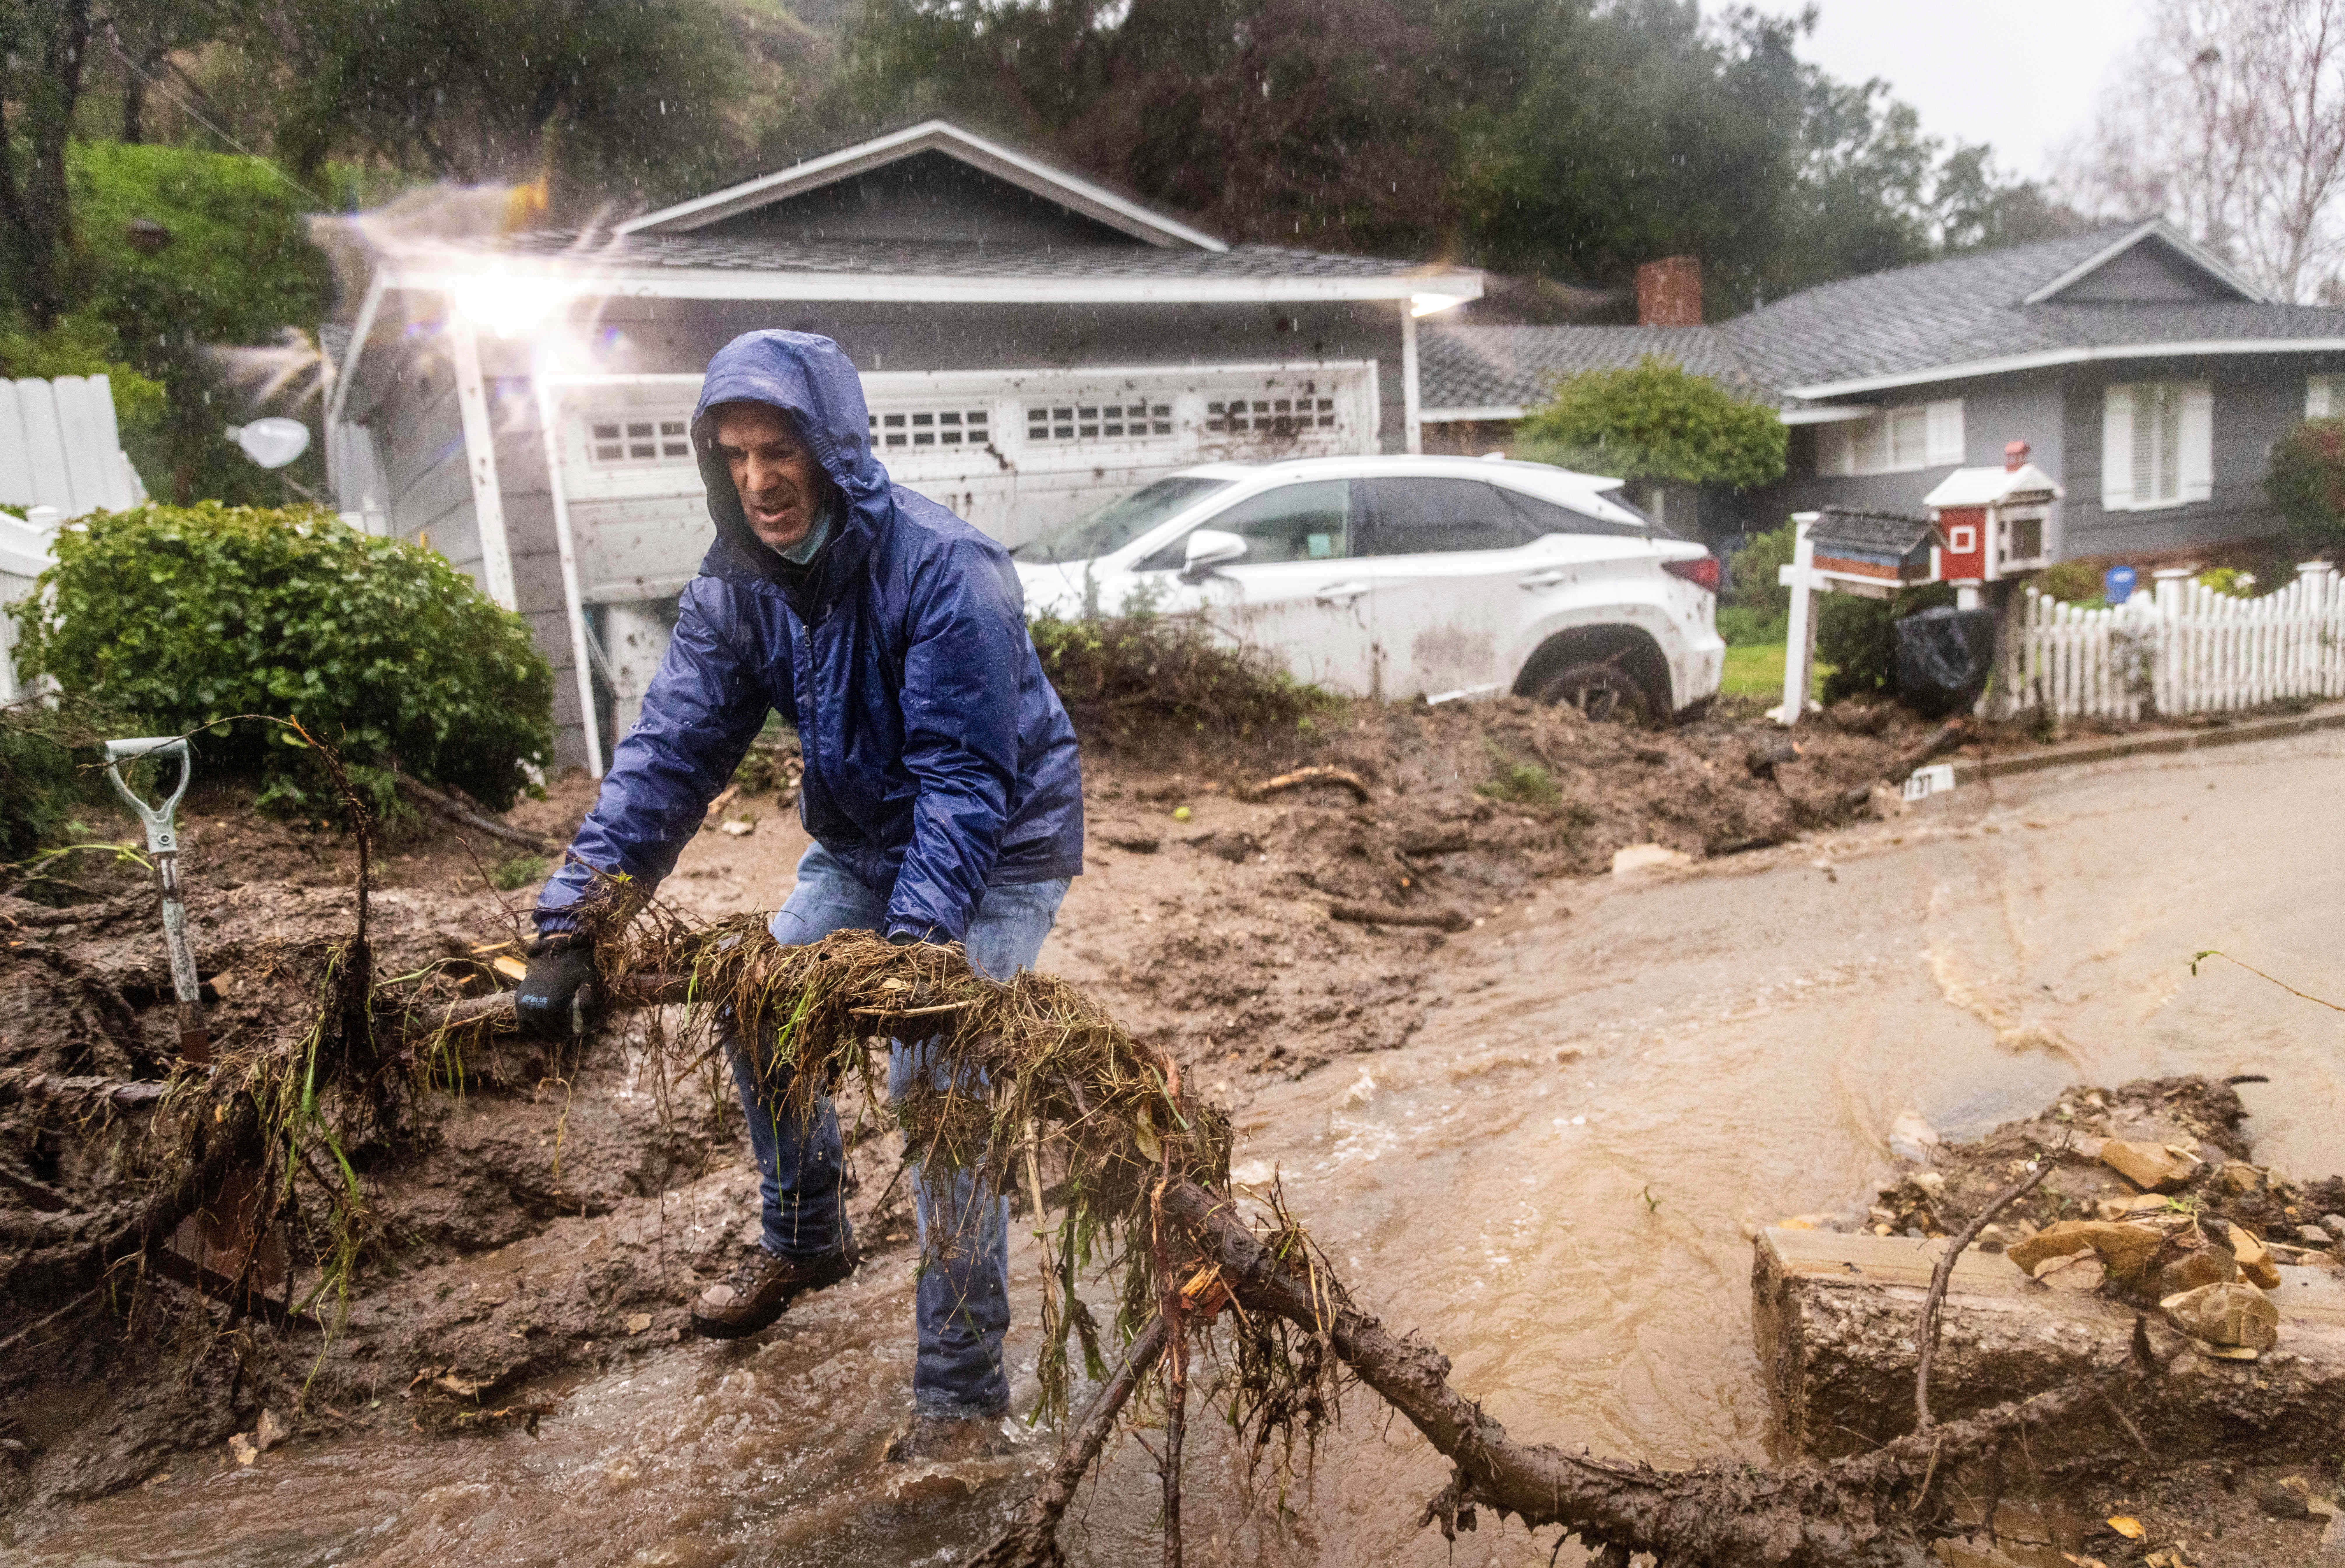 A man clears debris away from his house after a mudslide and flooding caused damage